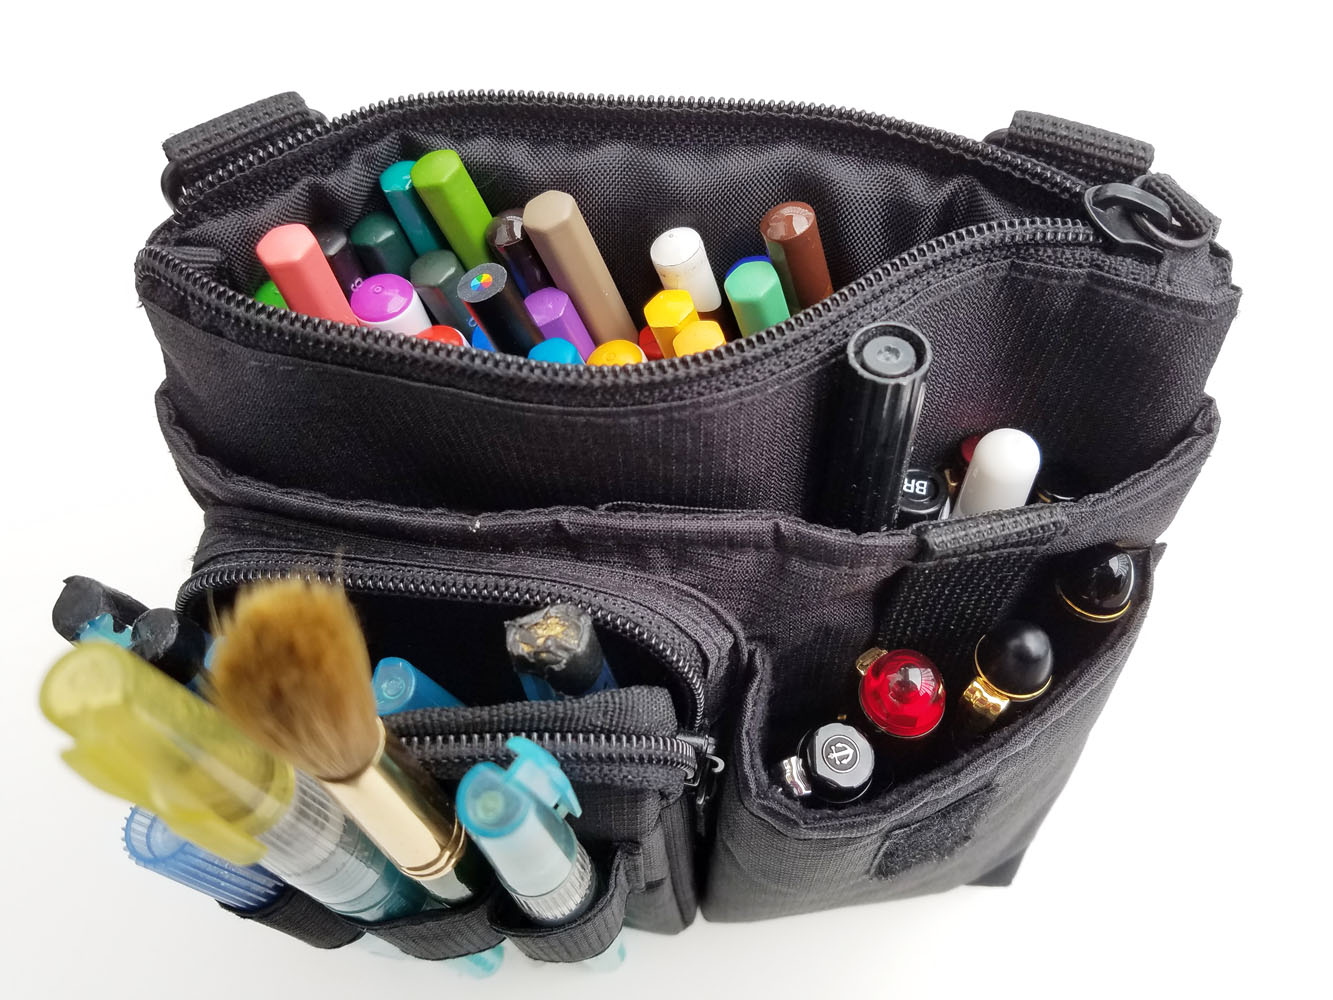 Fueled by Clouds & Coffee: Bags, Sketch Kits & More